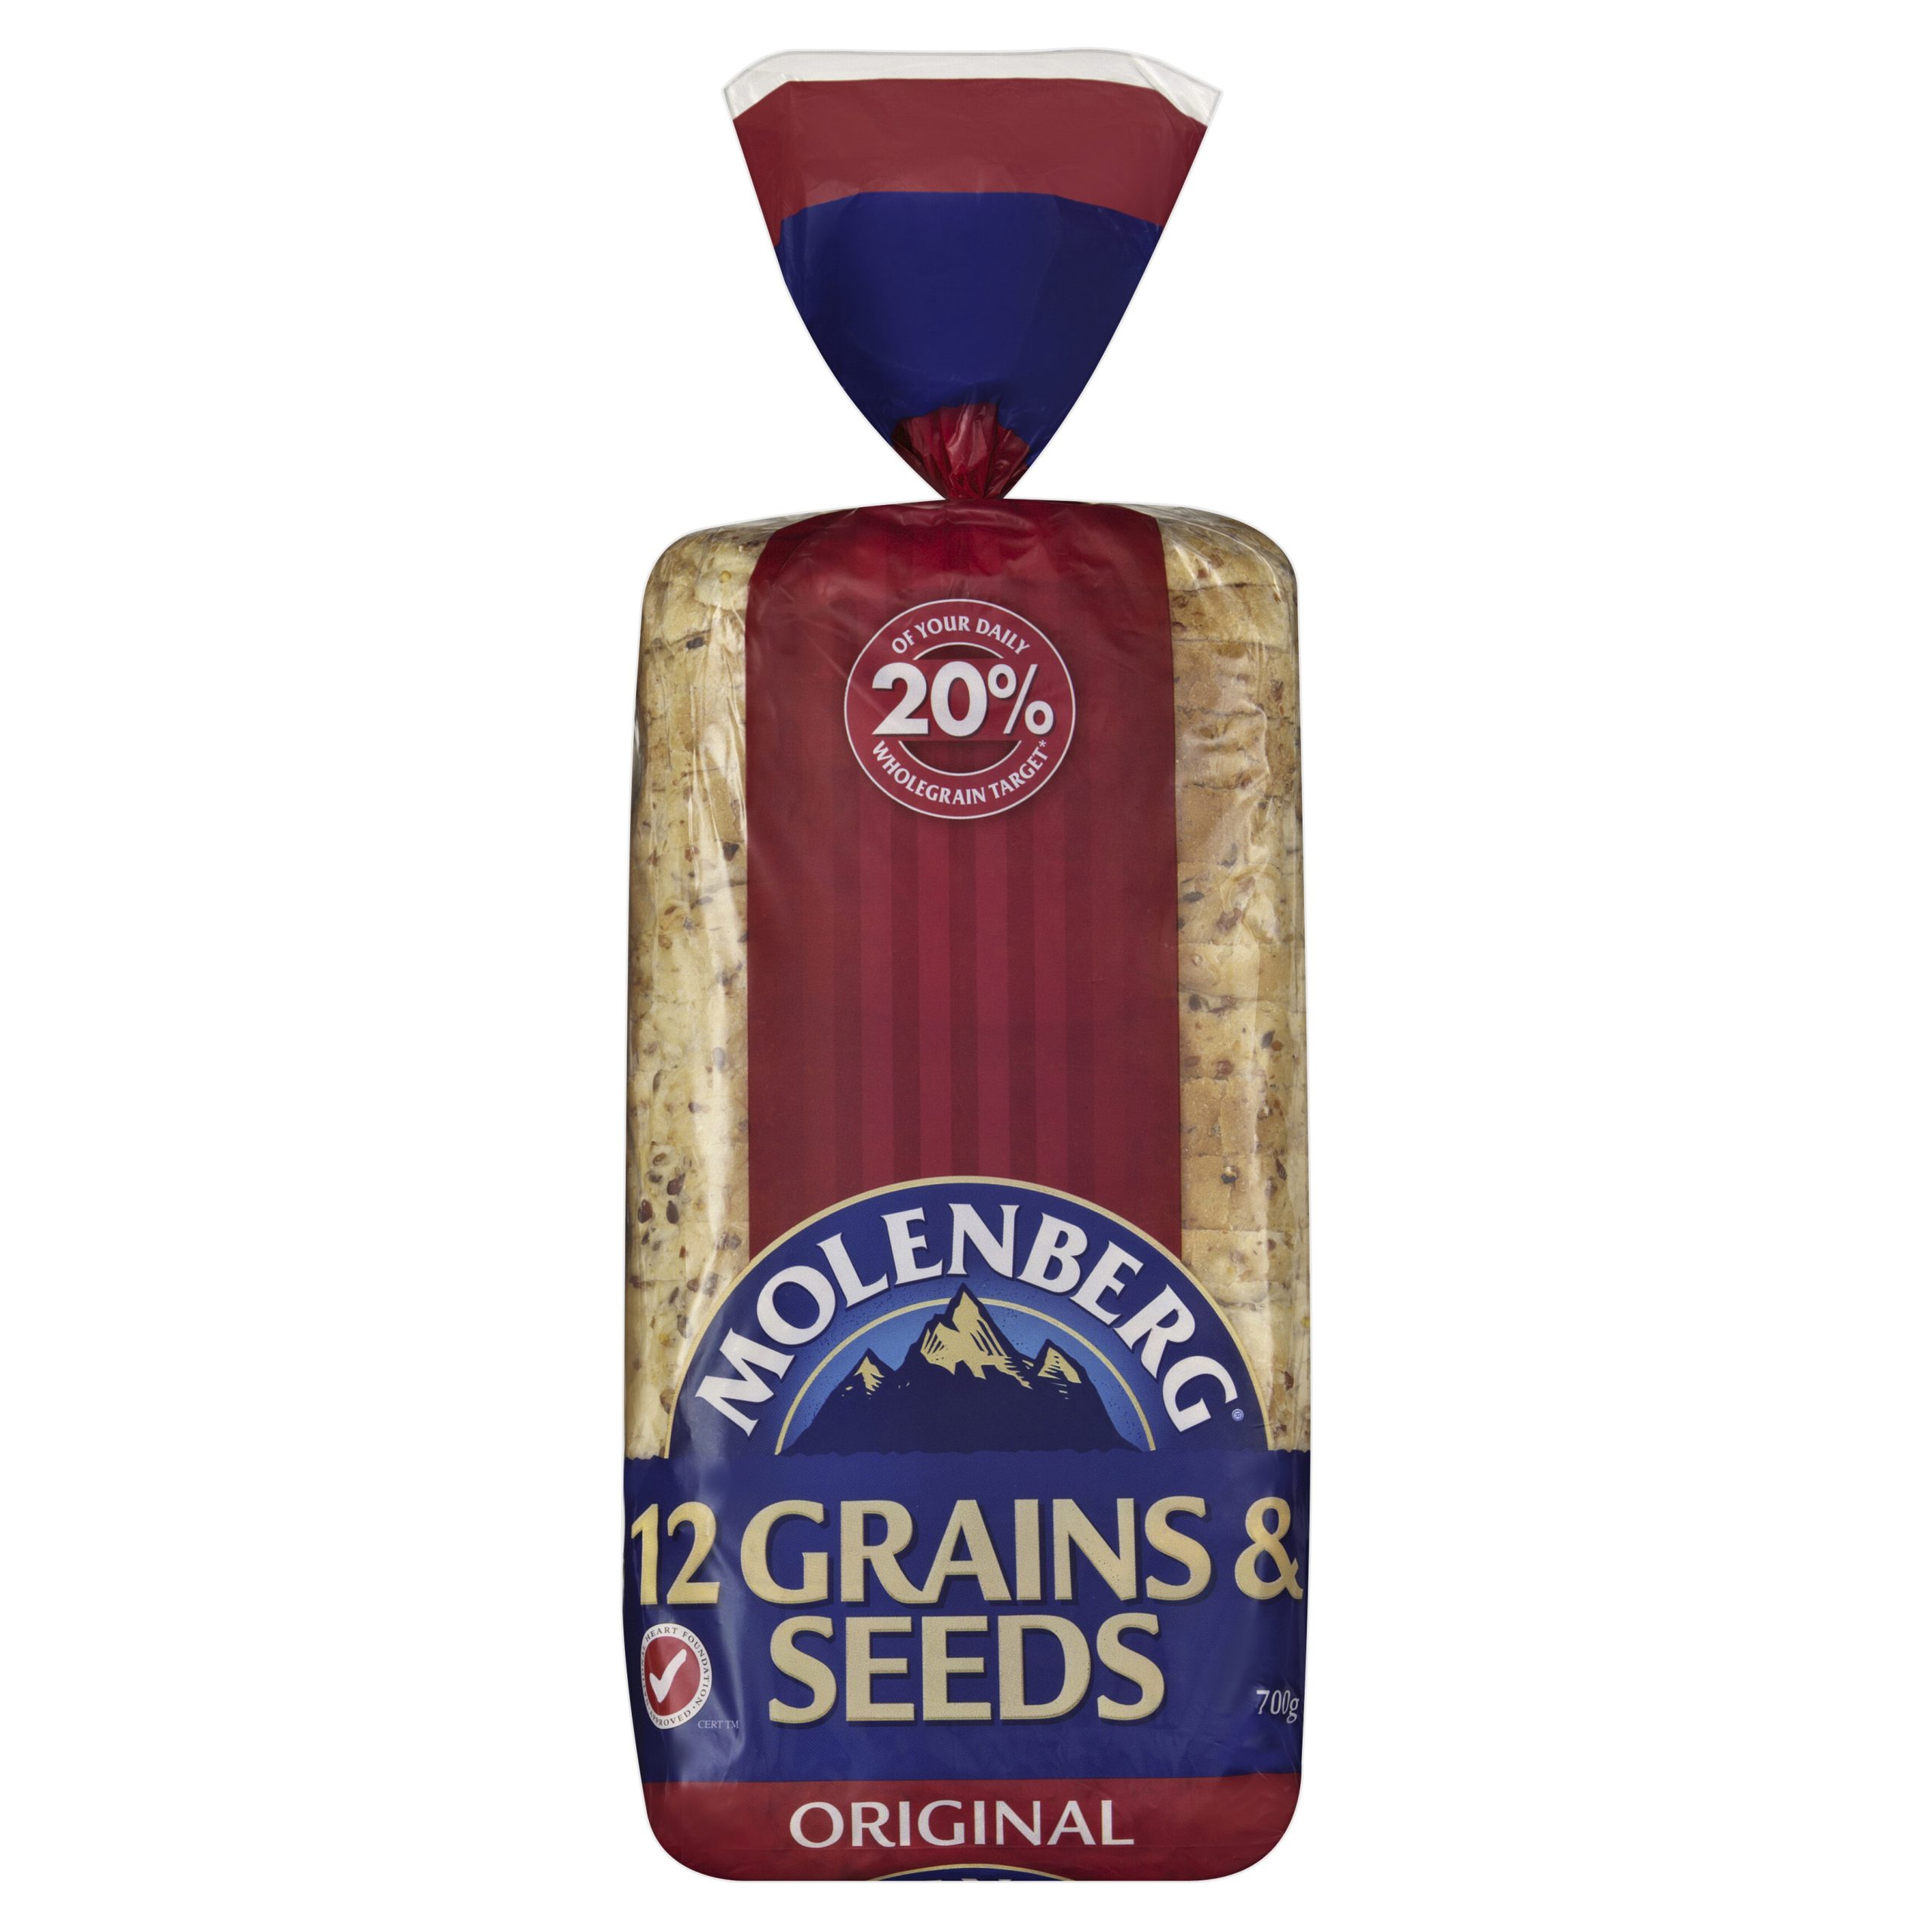 Molenberg Loaf Grain and Seed Original 700 g product photo